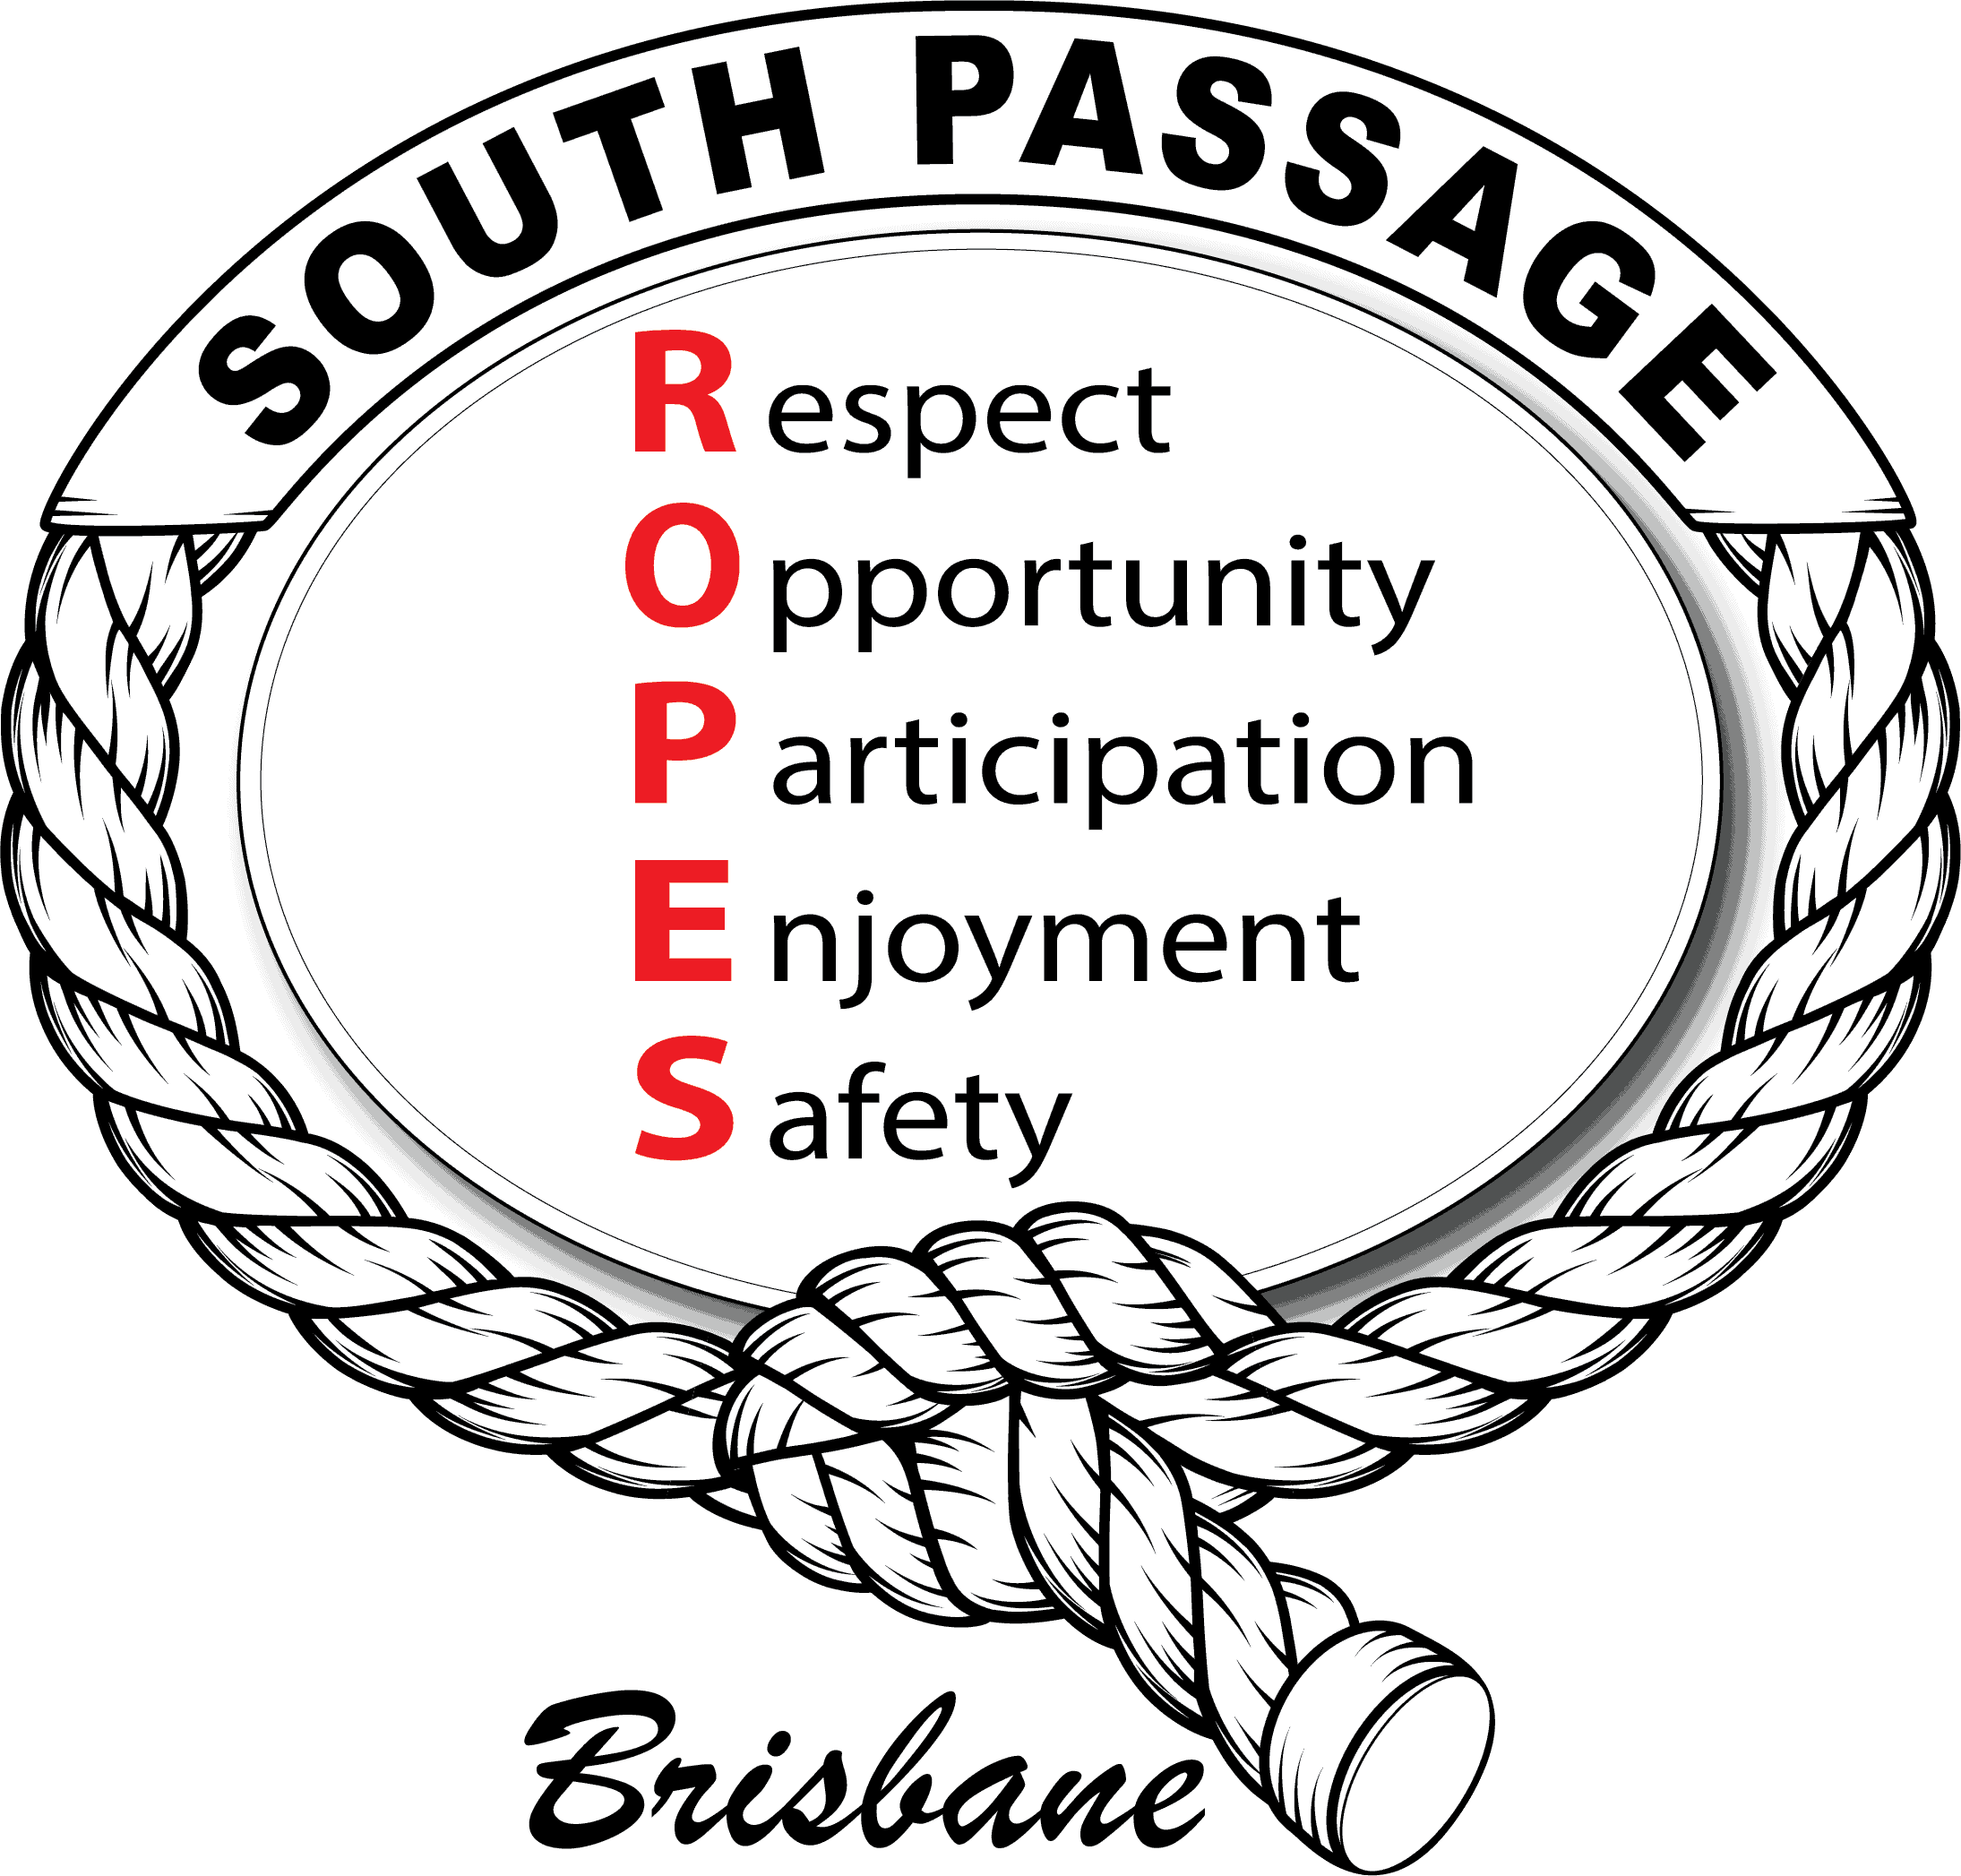 SouthPassage ROPES logo White Centre with Caps Red)